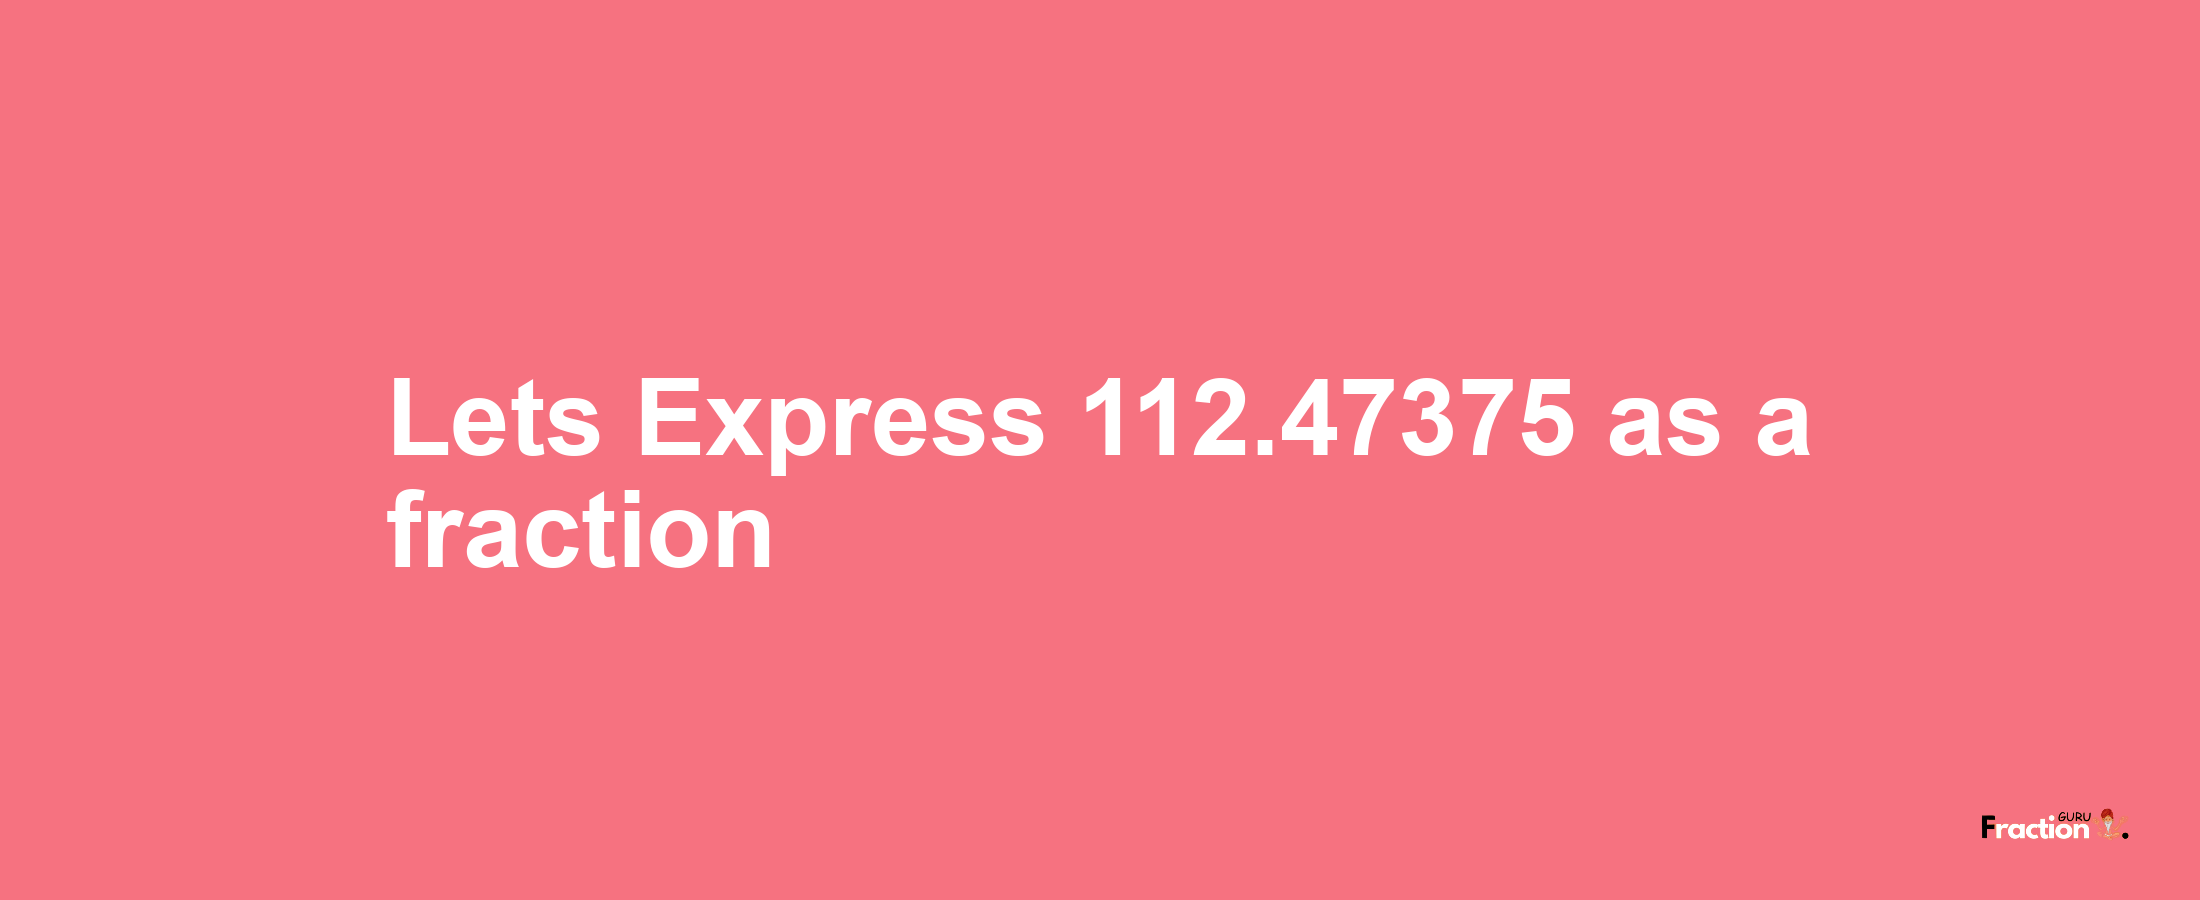 Lets Express 112.47375 as afraction